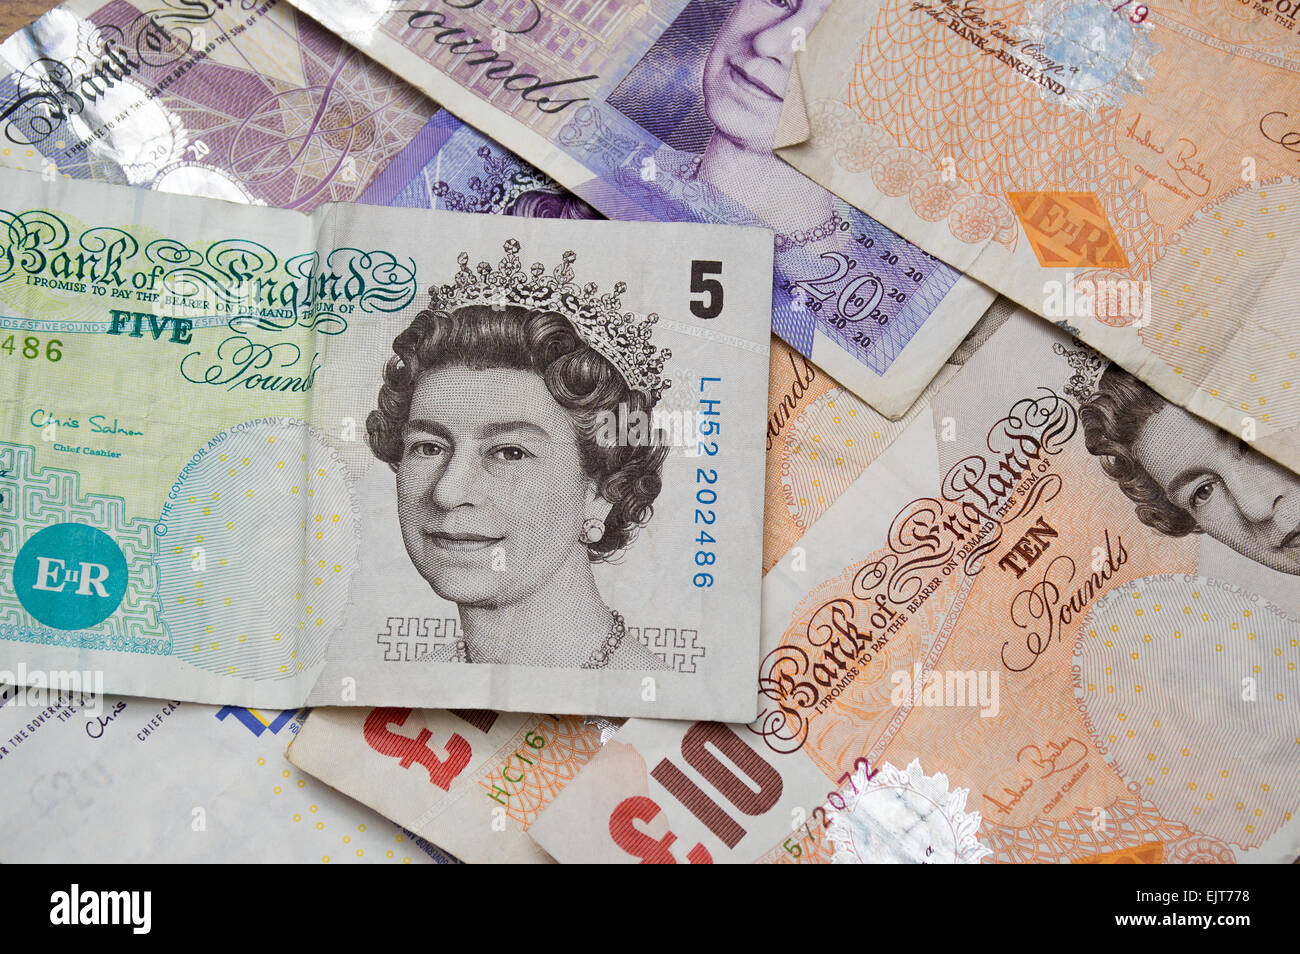 UK Currency notes Stock Photo